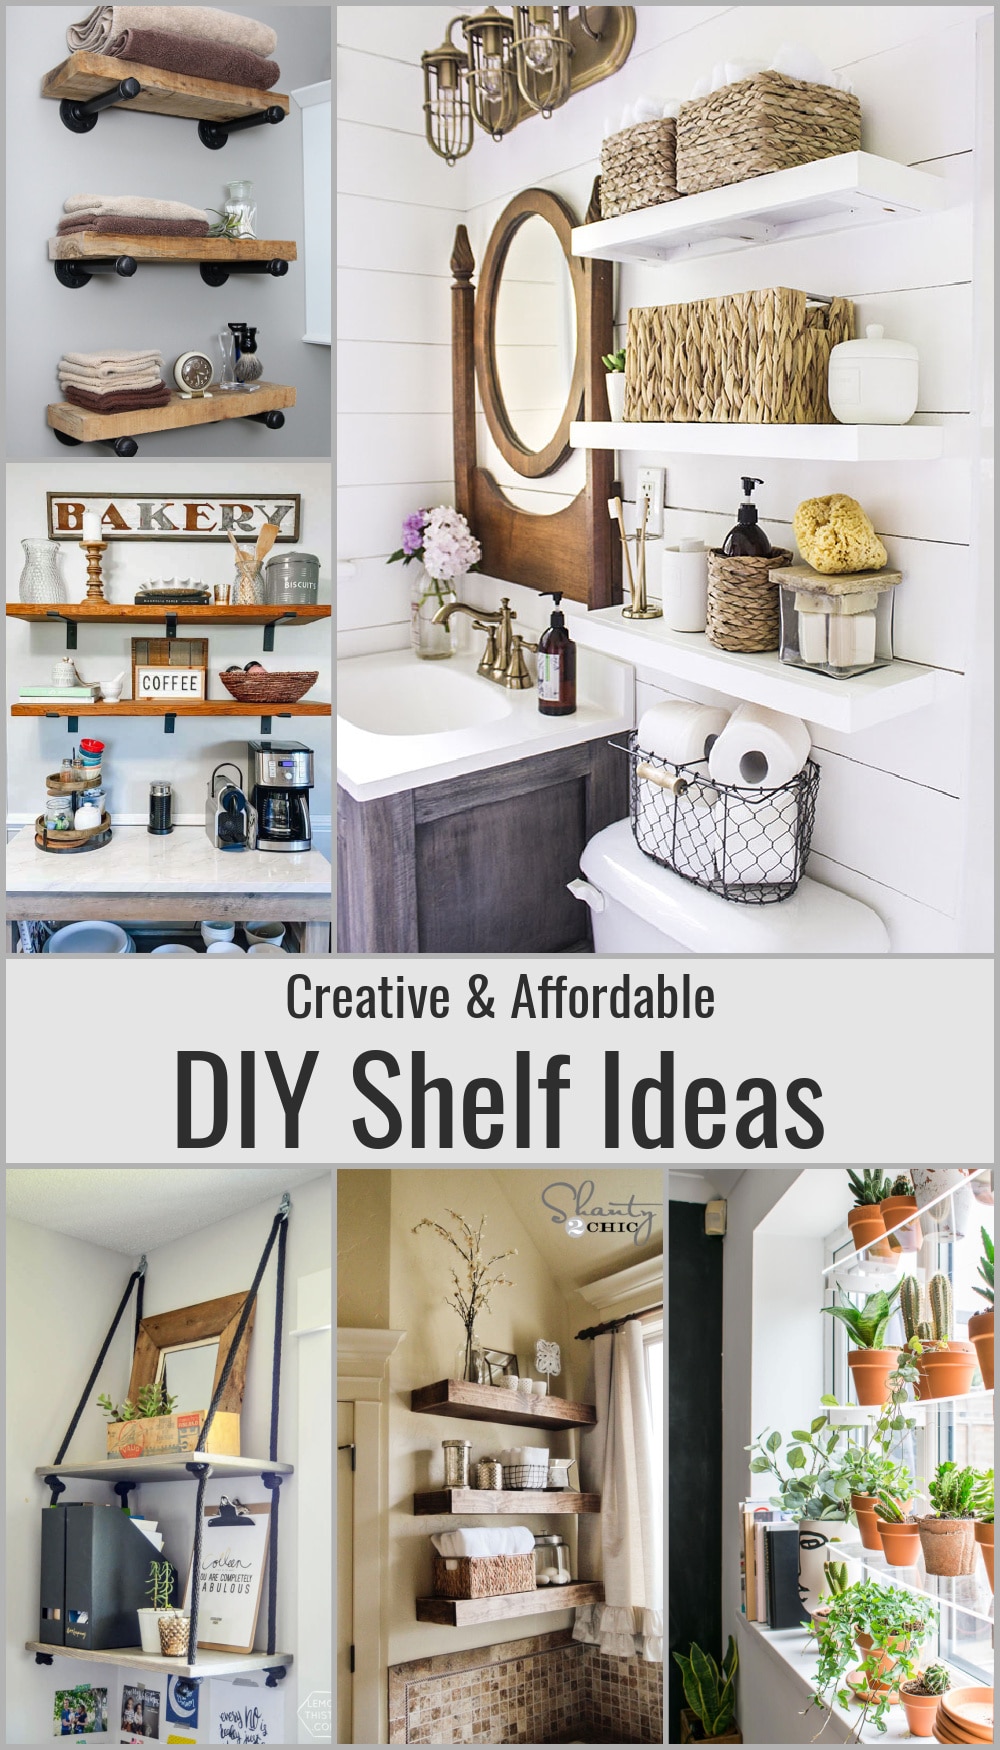 DIY Home Decor Projects - Do It Yourself Interior Design